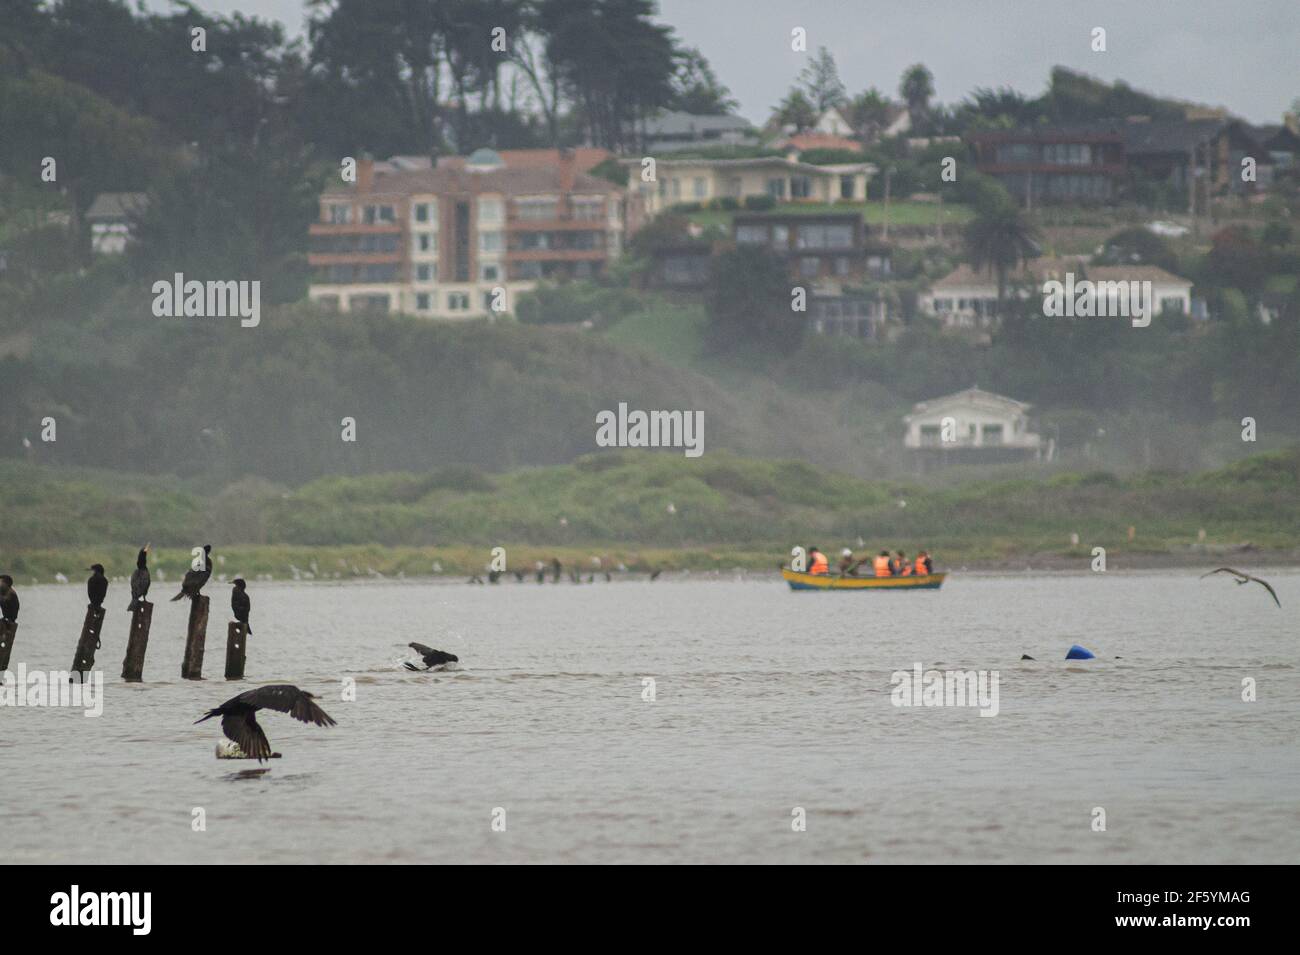 Images of the Maipo wetland, Llolleo, Valparaíso, Chile. Stock Photo